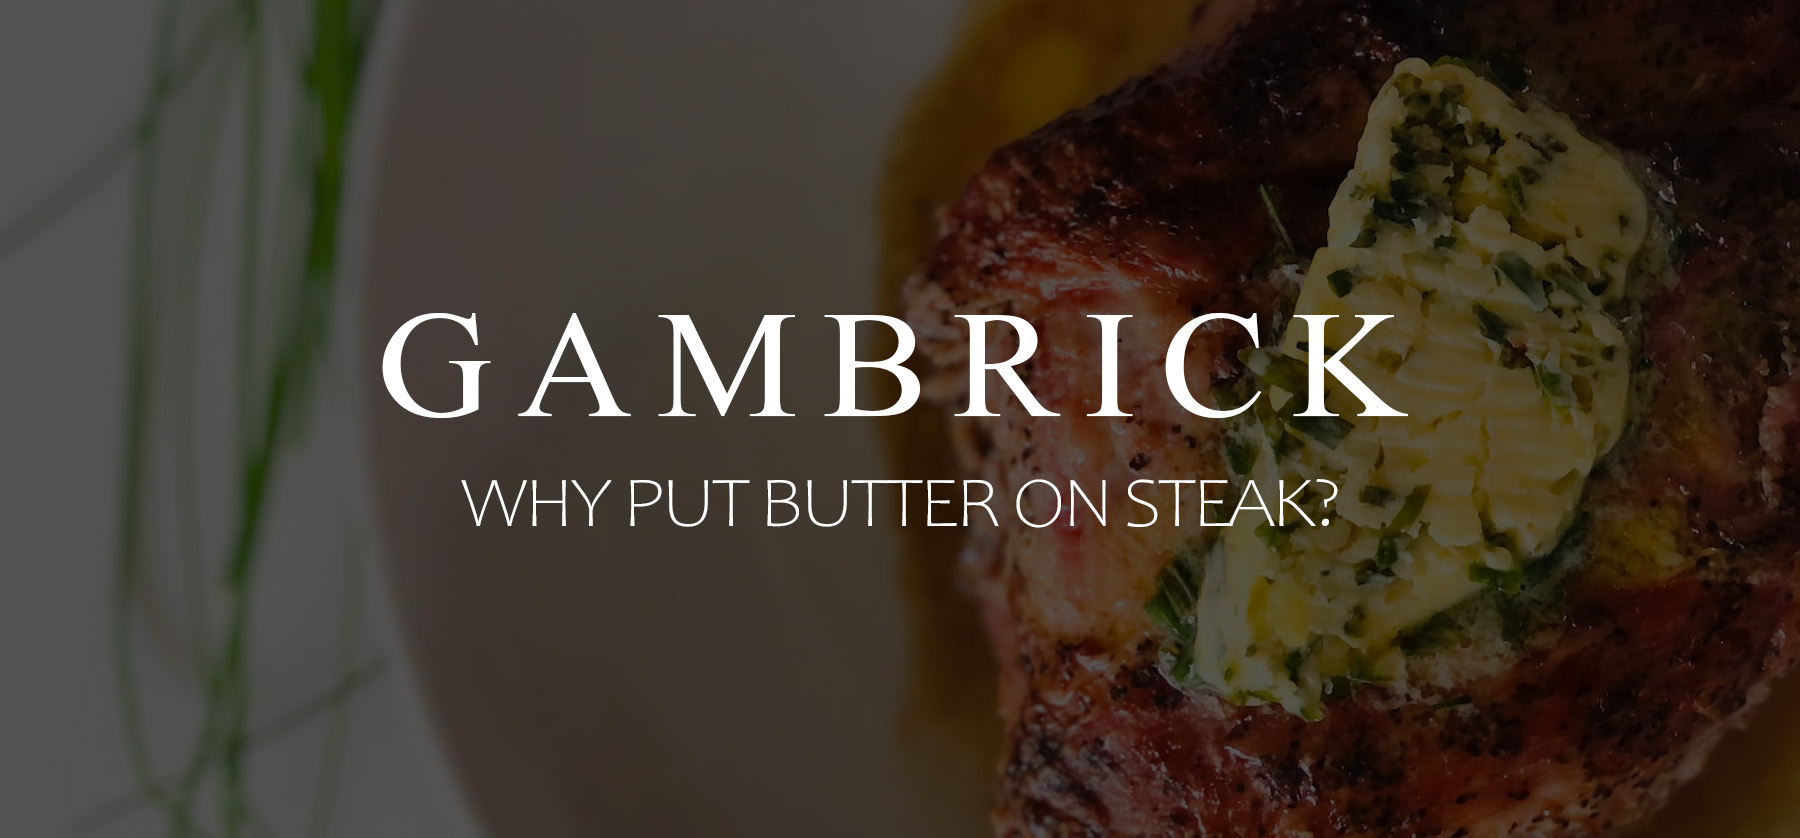 why put butter on steak banner 1.1 copy